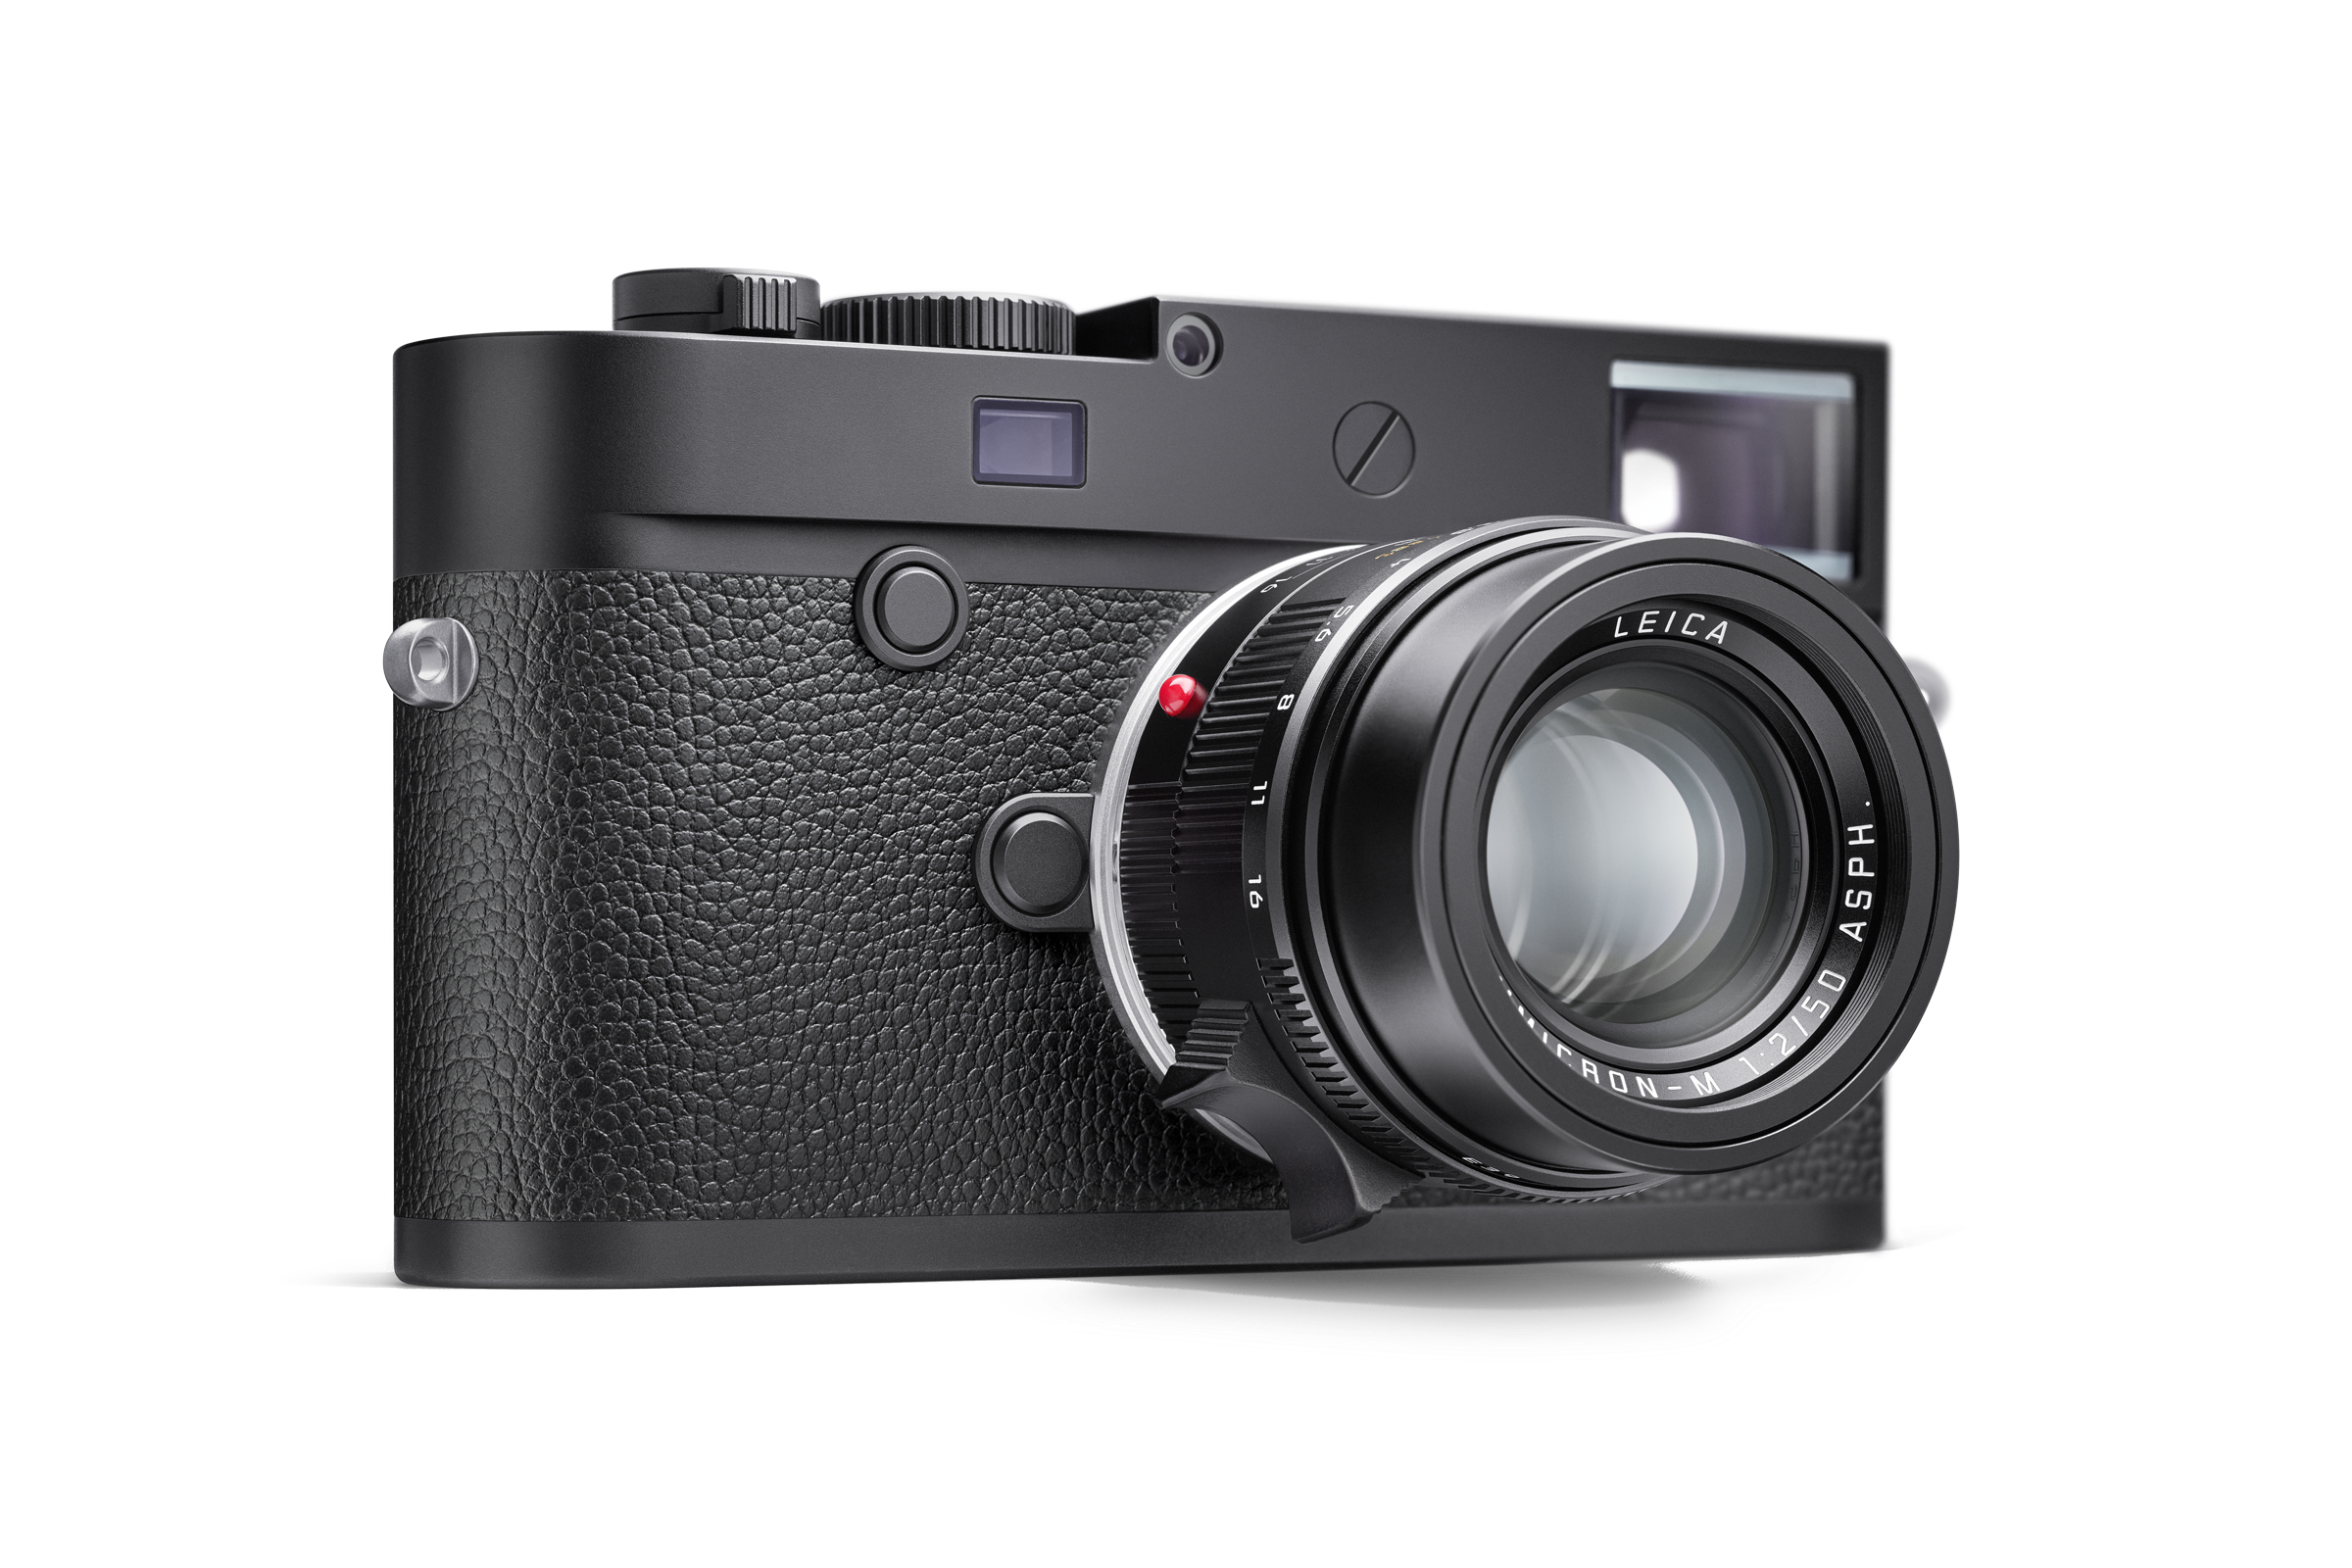 The New Black And White Leica Does Things Color Cameras Can T Popular Science